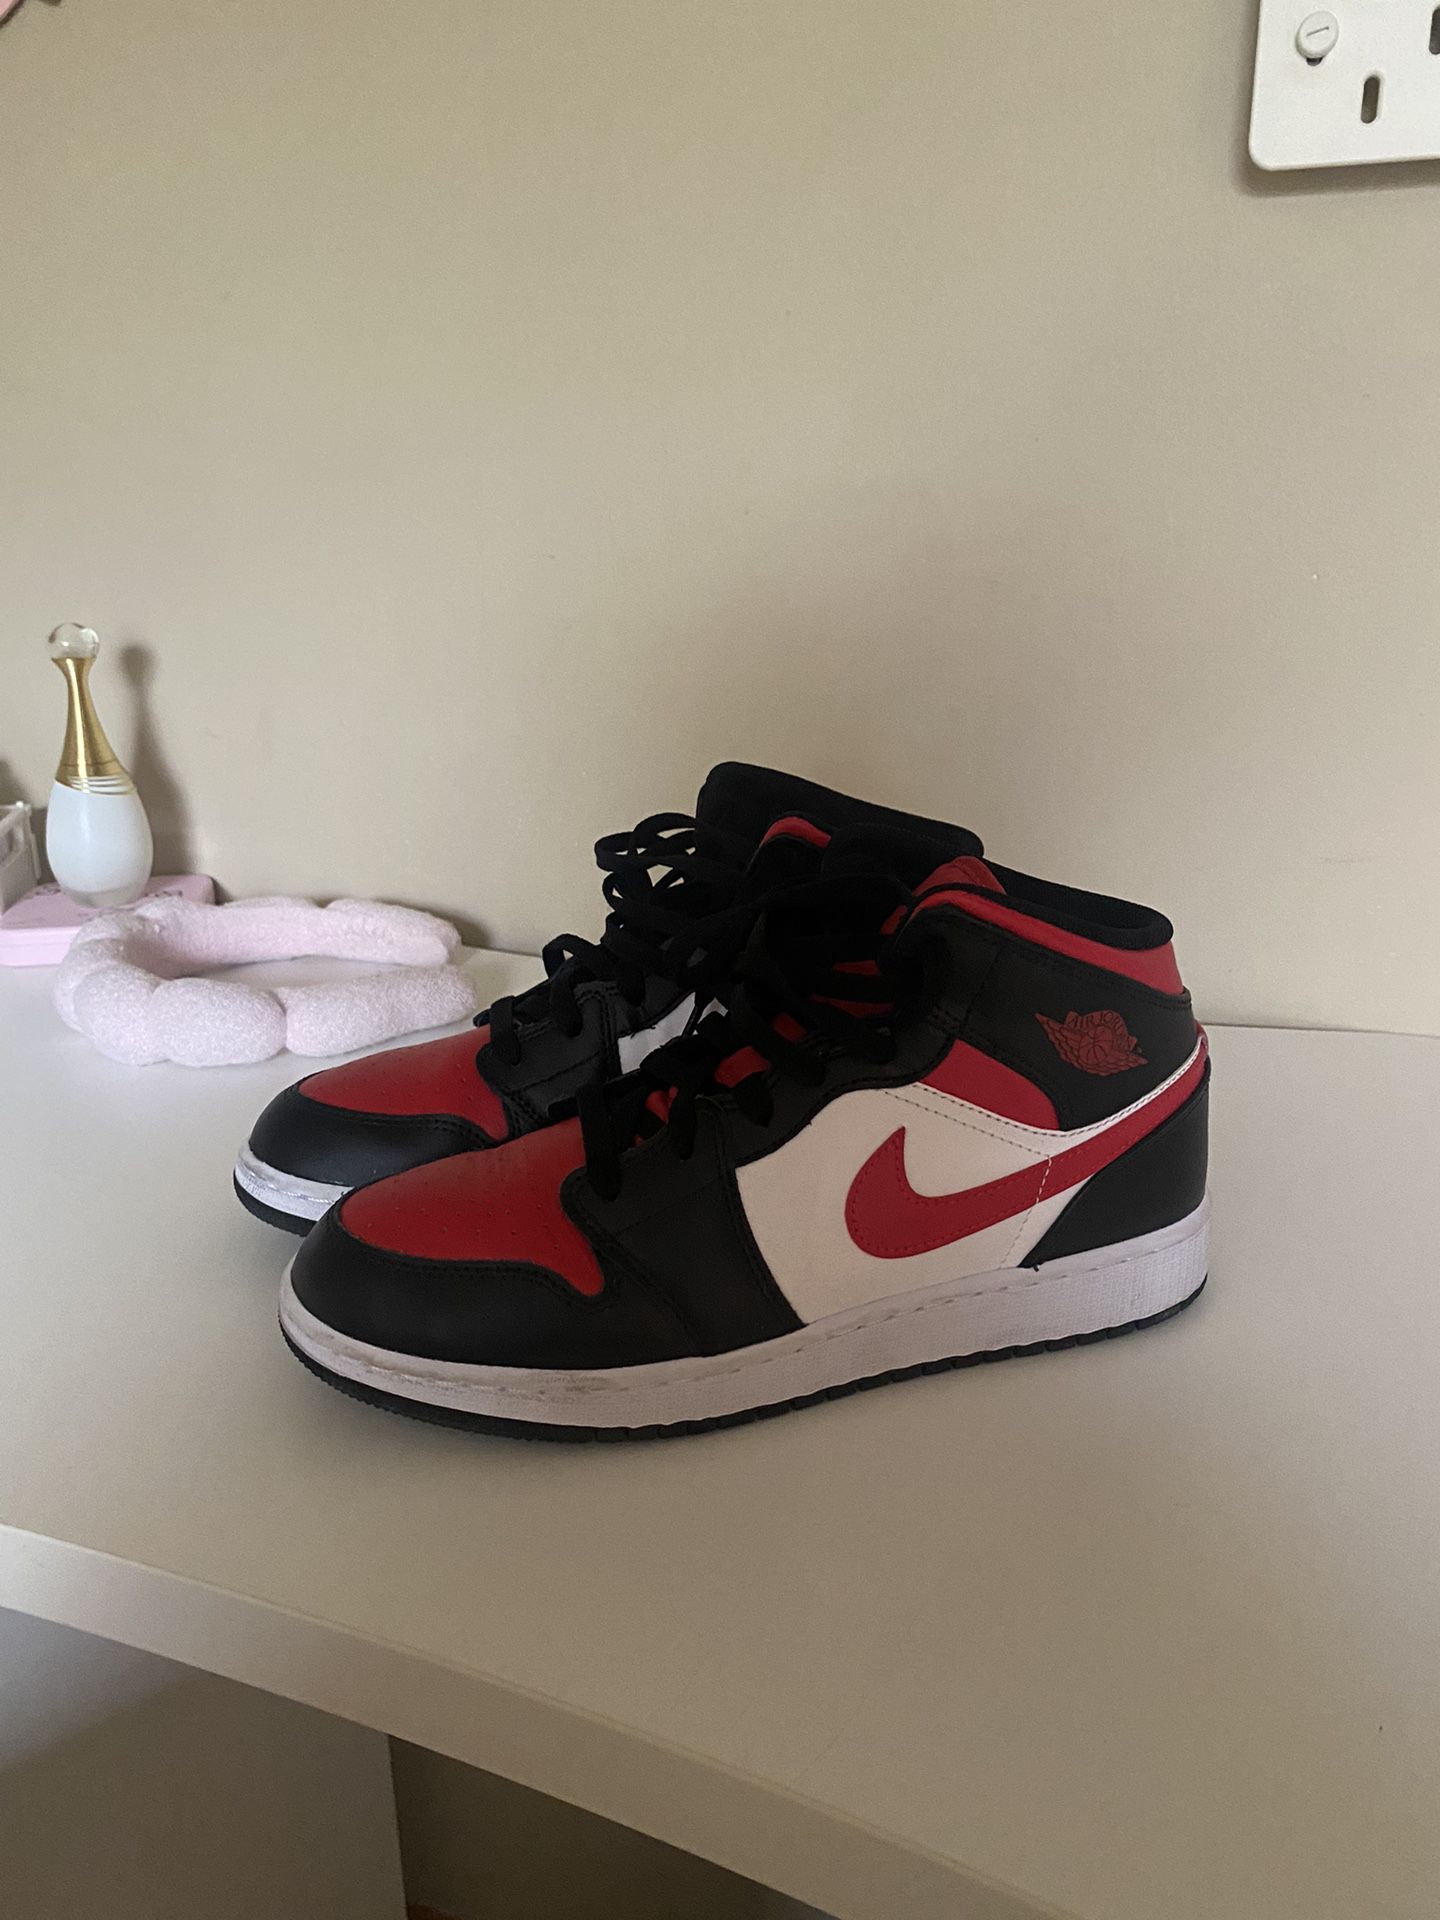 Jordan 1 Bred Toe Mid, Size 7 In  Woman’s (without The Box) First Time Selling 😭